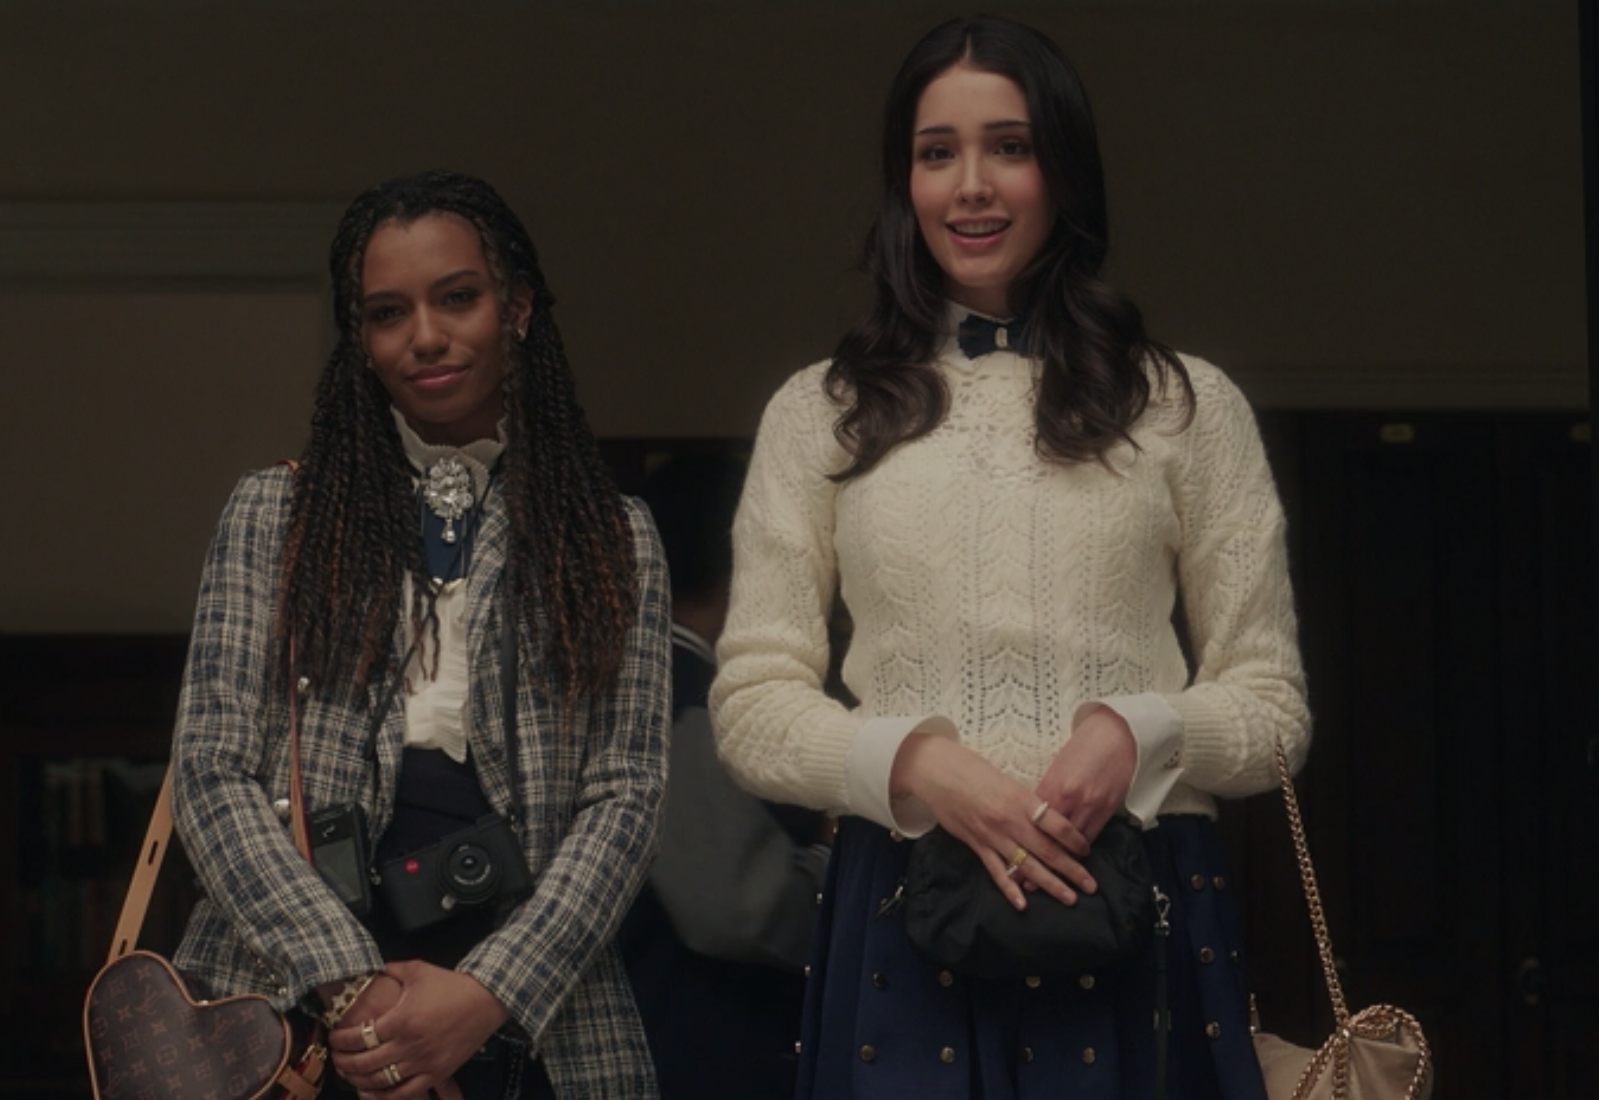 Monet wears a tight-fitting plaid blazer over a top with ruffles on it, and Luna wears a studded high-waisted skirt and a knit sweater